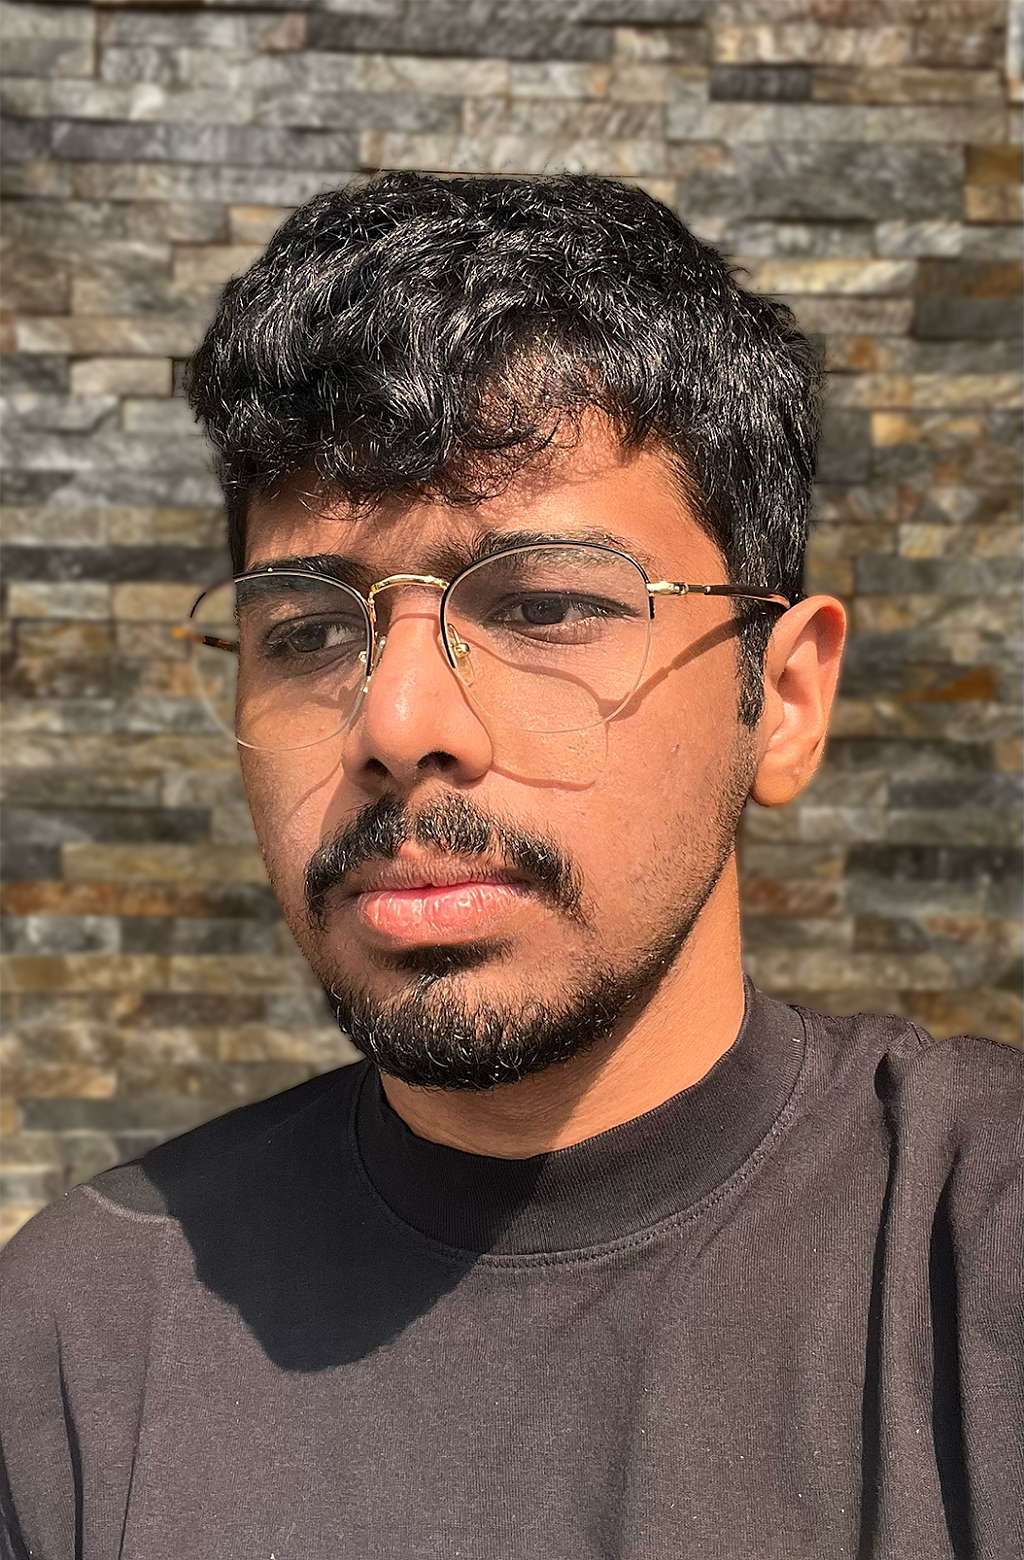 Photograph of an Indian man with black hair and glasses. He is standing in front of a stone wall, wearing a black t-shirt.